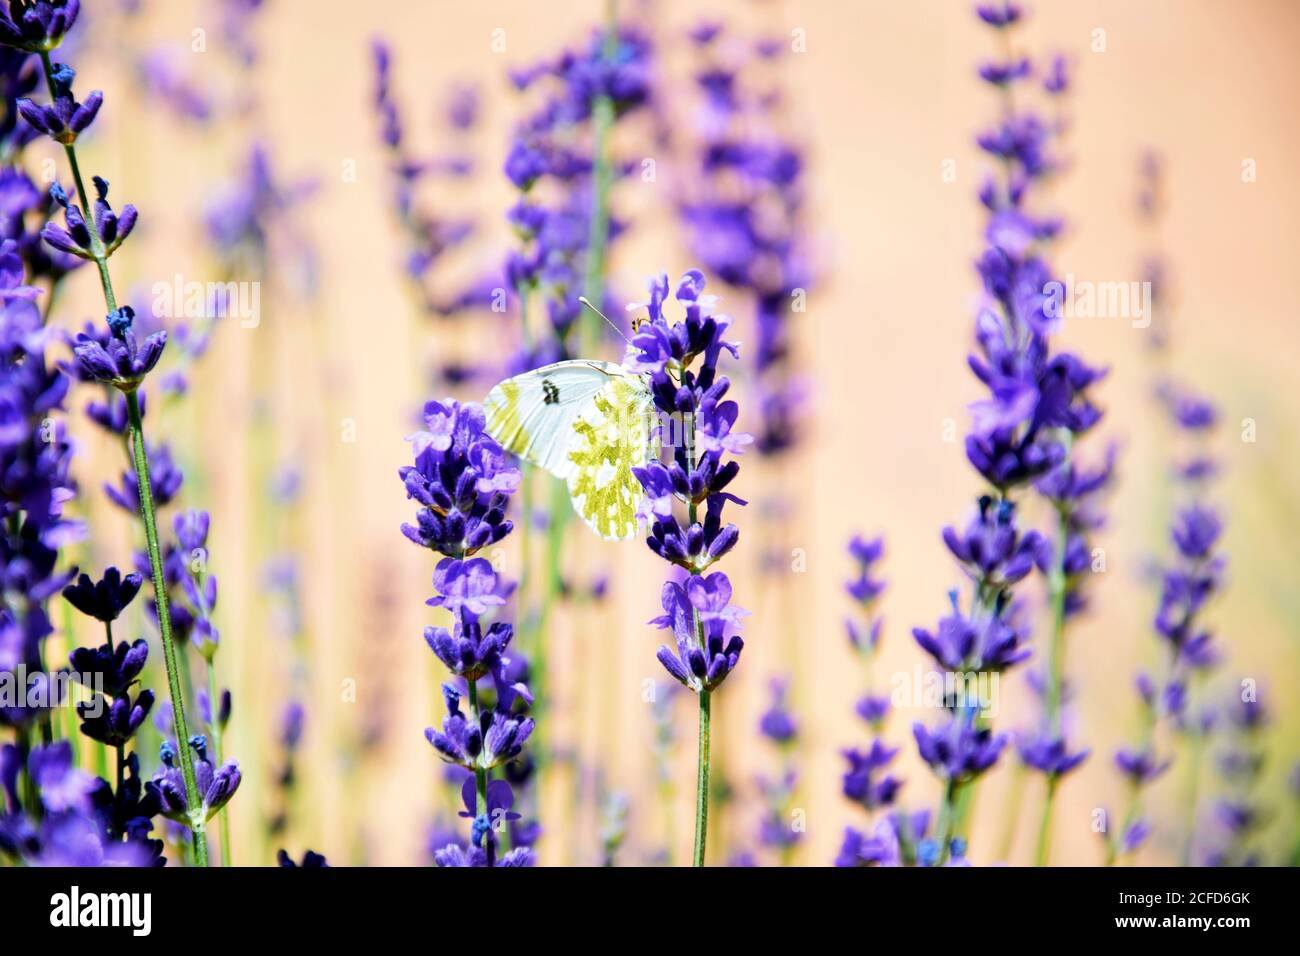 lavender flowers in the garden with butterfly Stock Photo